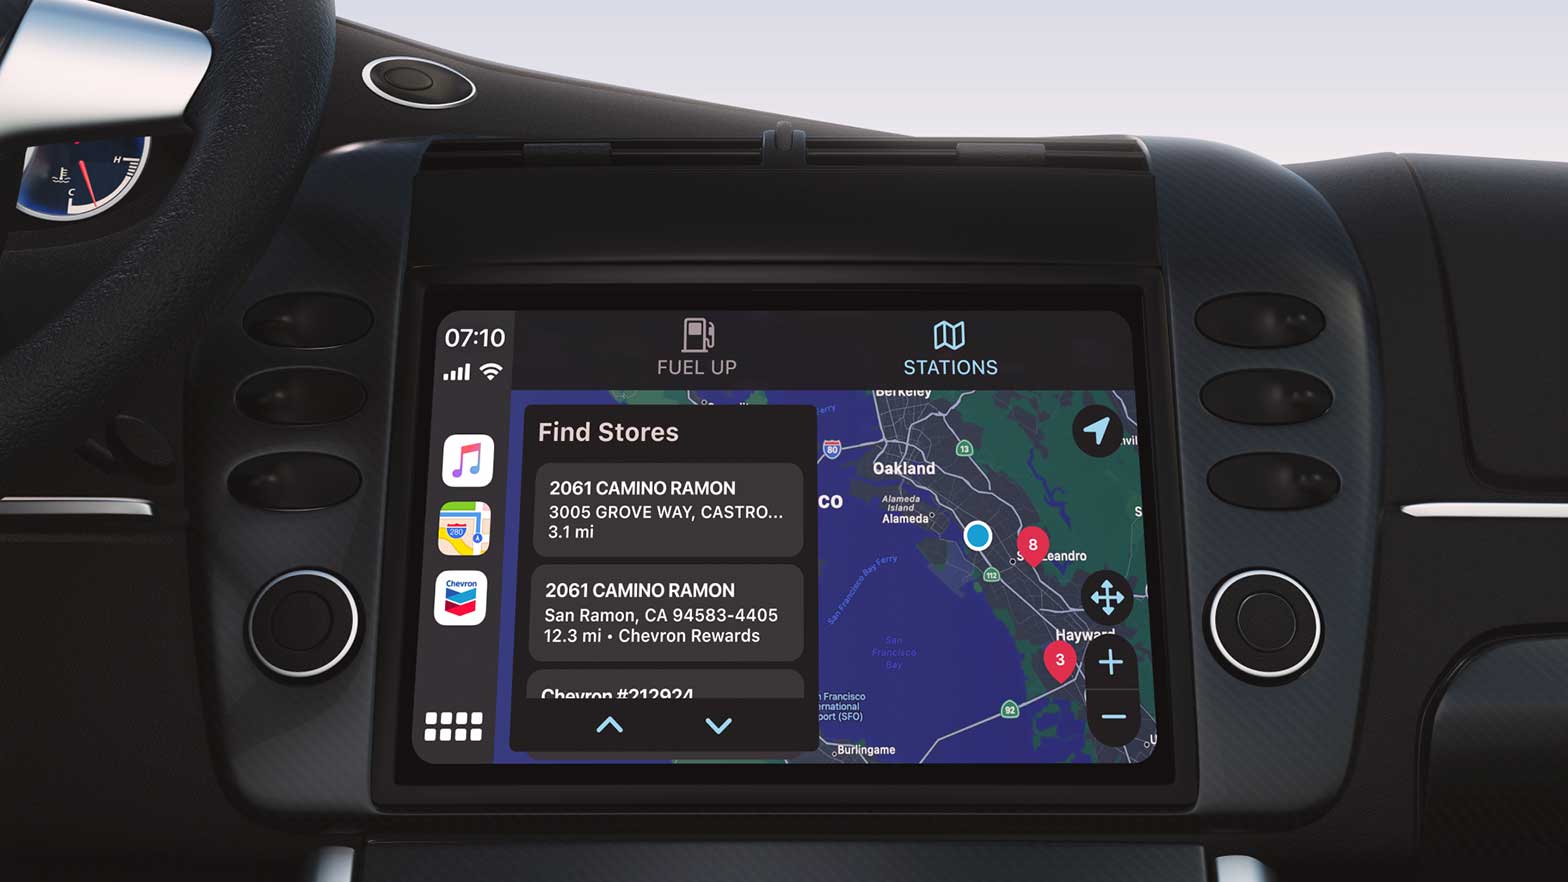 image of apple carplay on a dashboard in a car